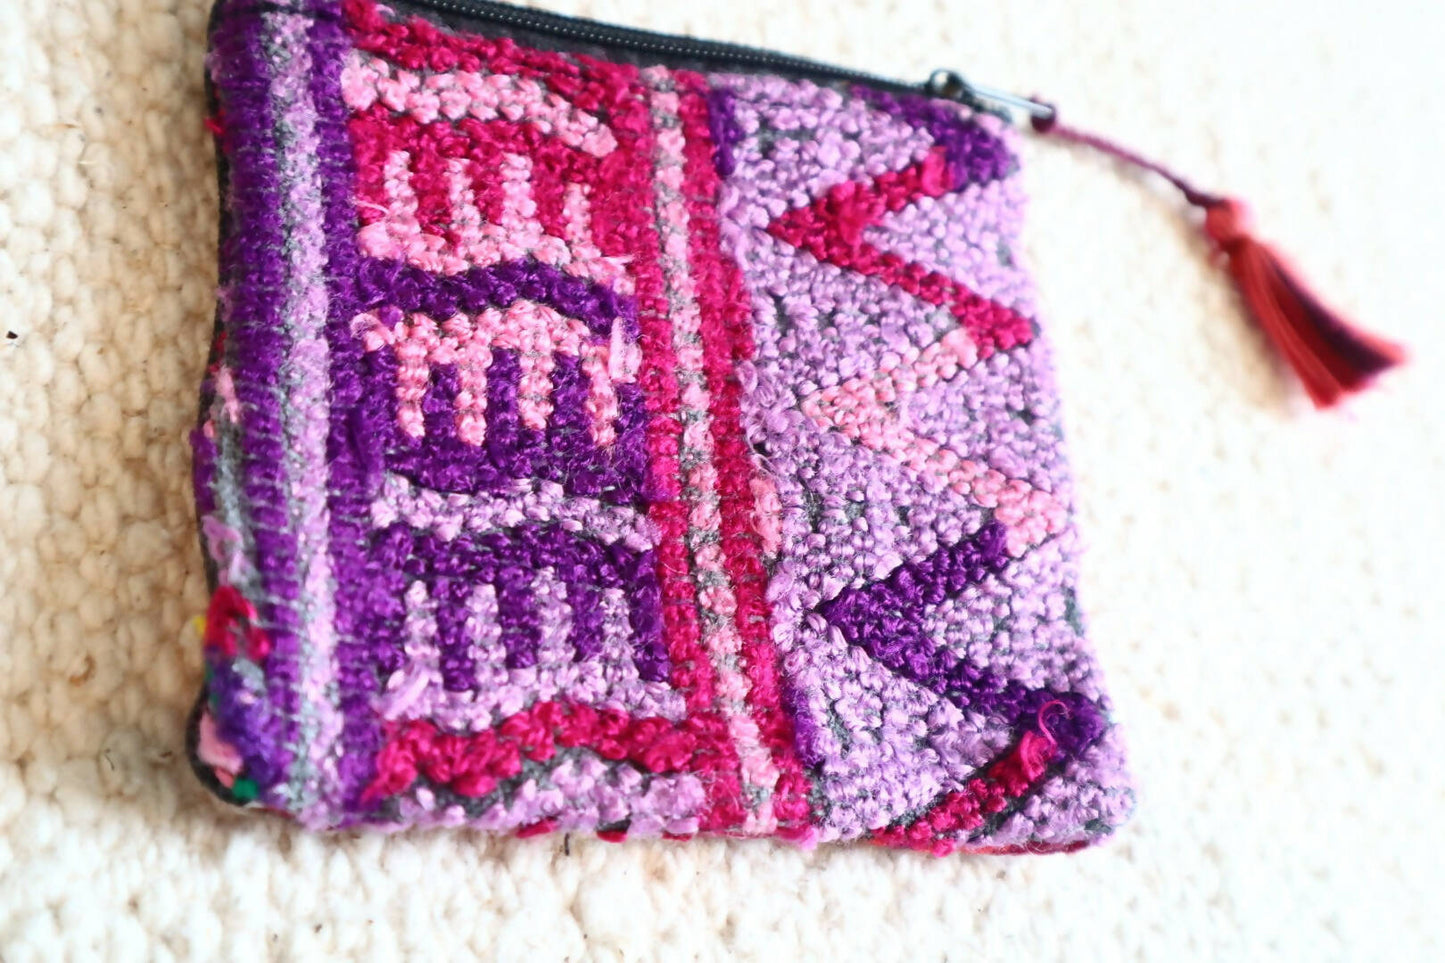 Huipil Coin Pouch - Pink Geometric